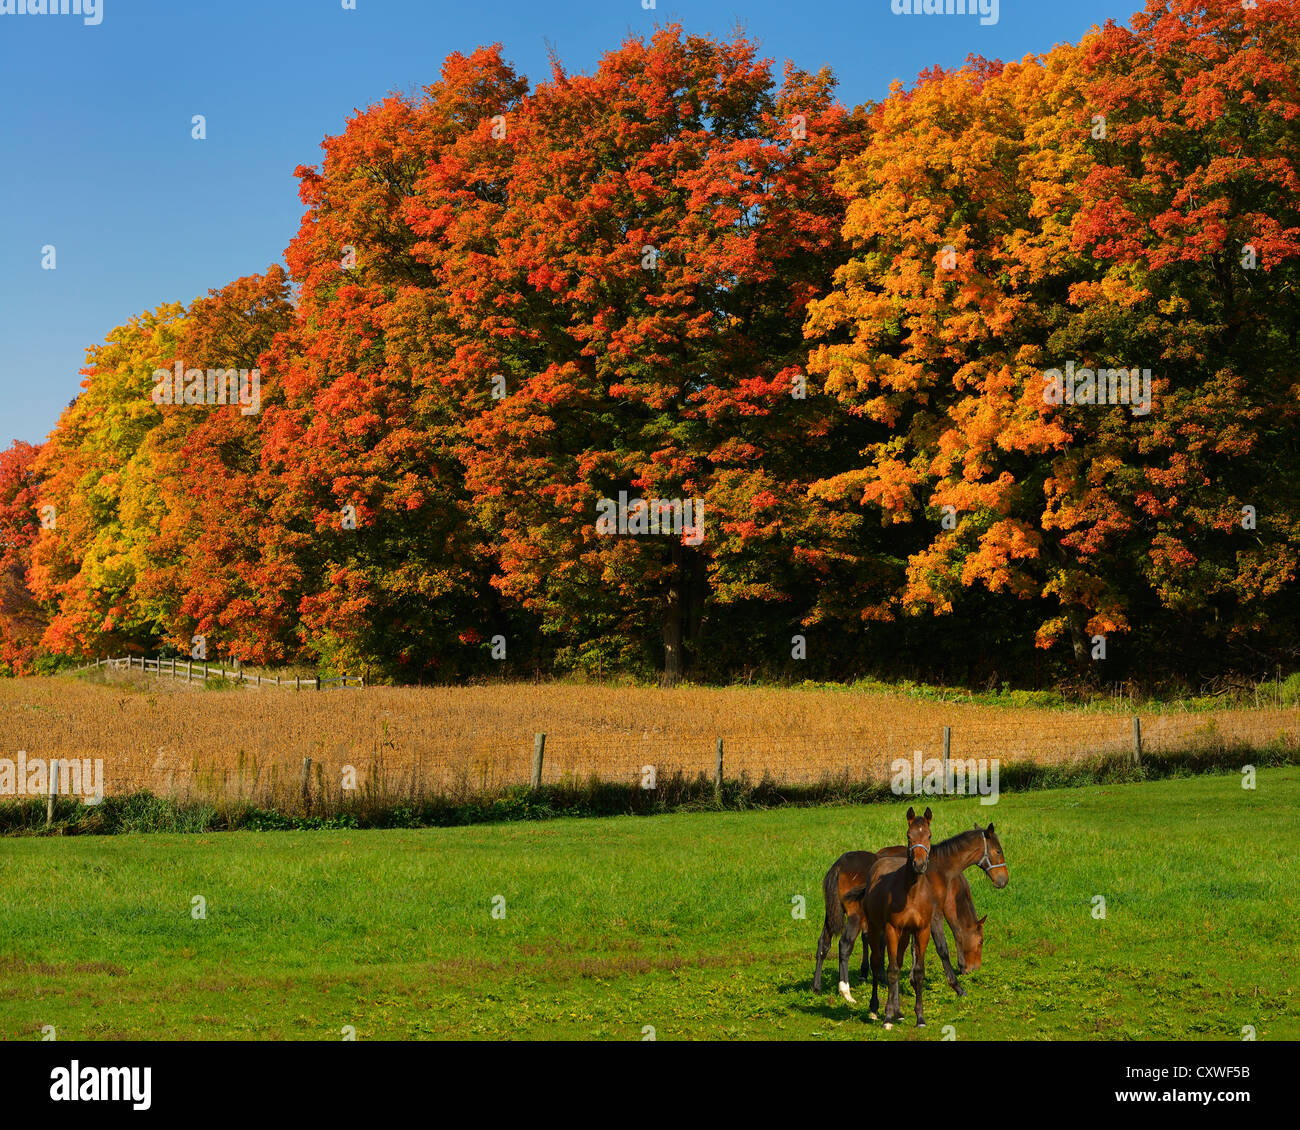 Three brown horses in a field with red maple trees in the Fall in Caledon Ontario Stock Photo